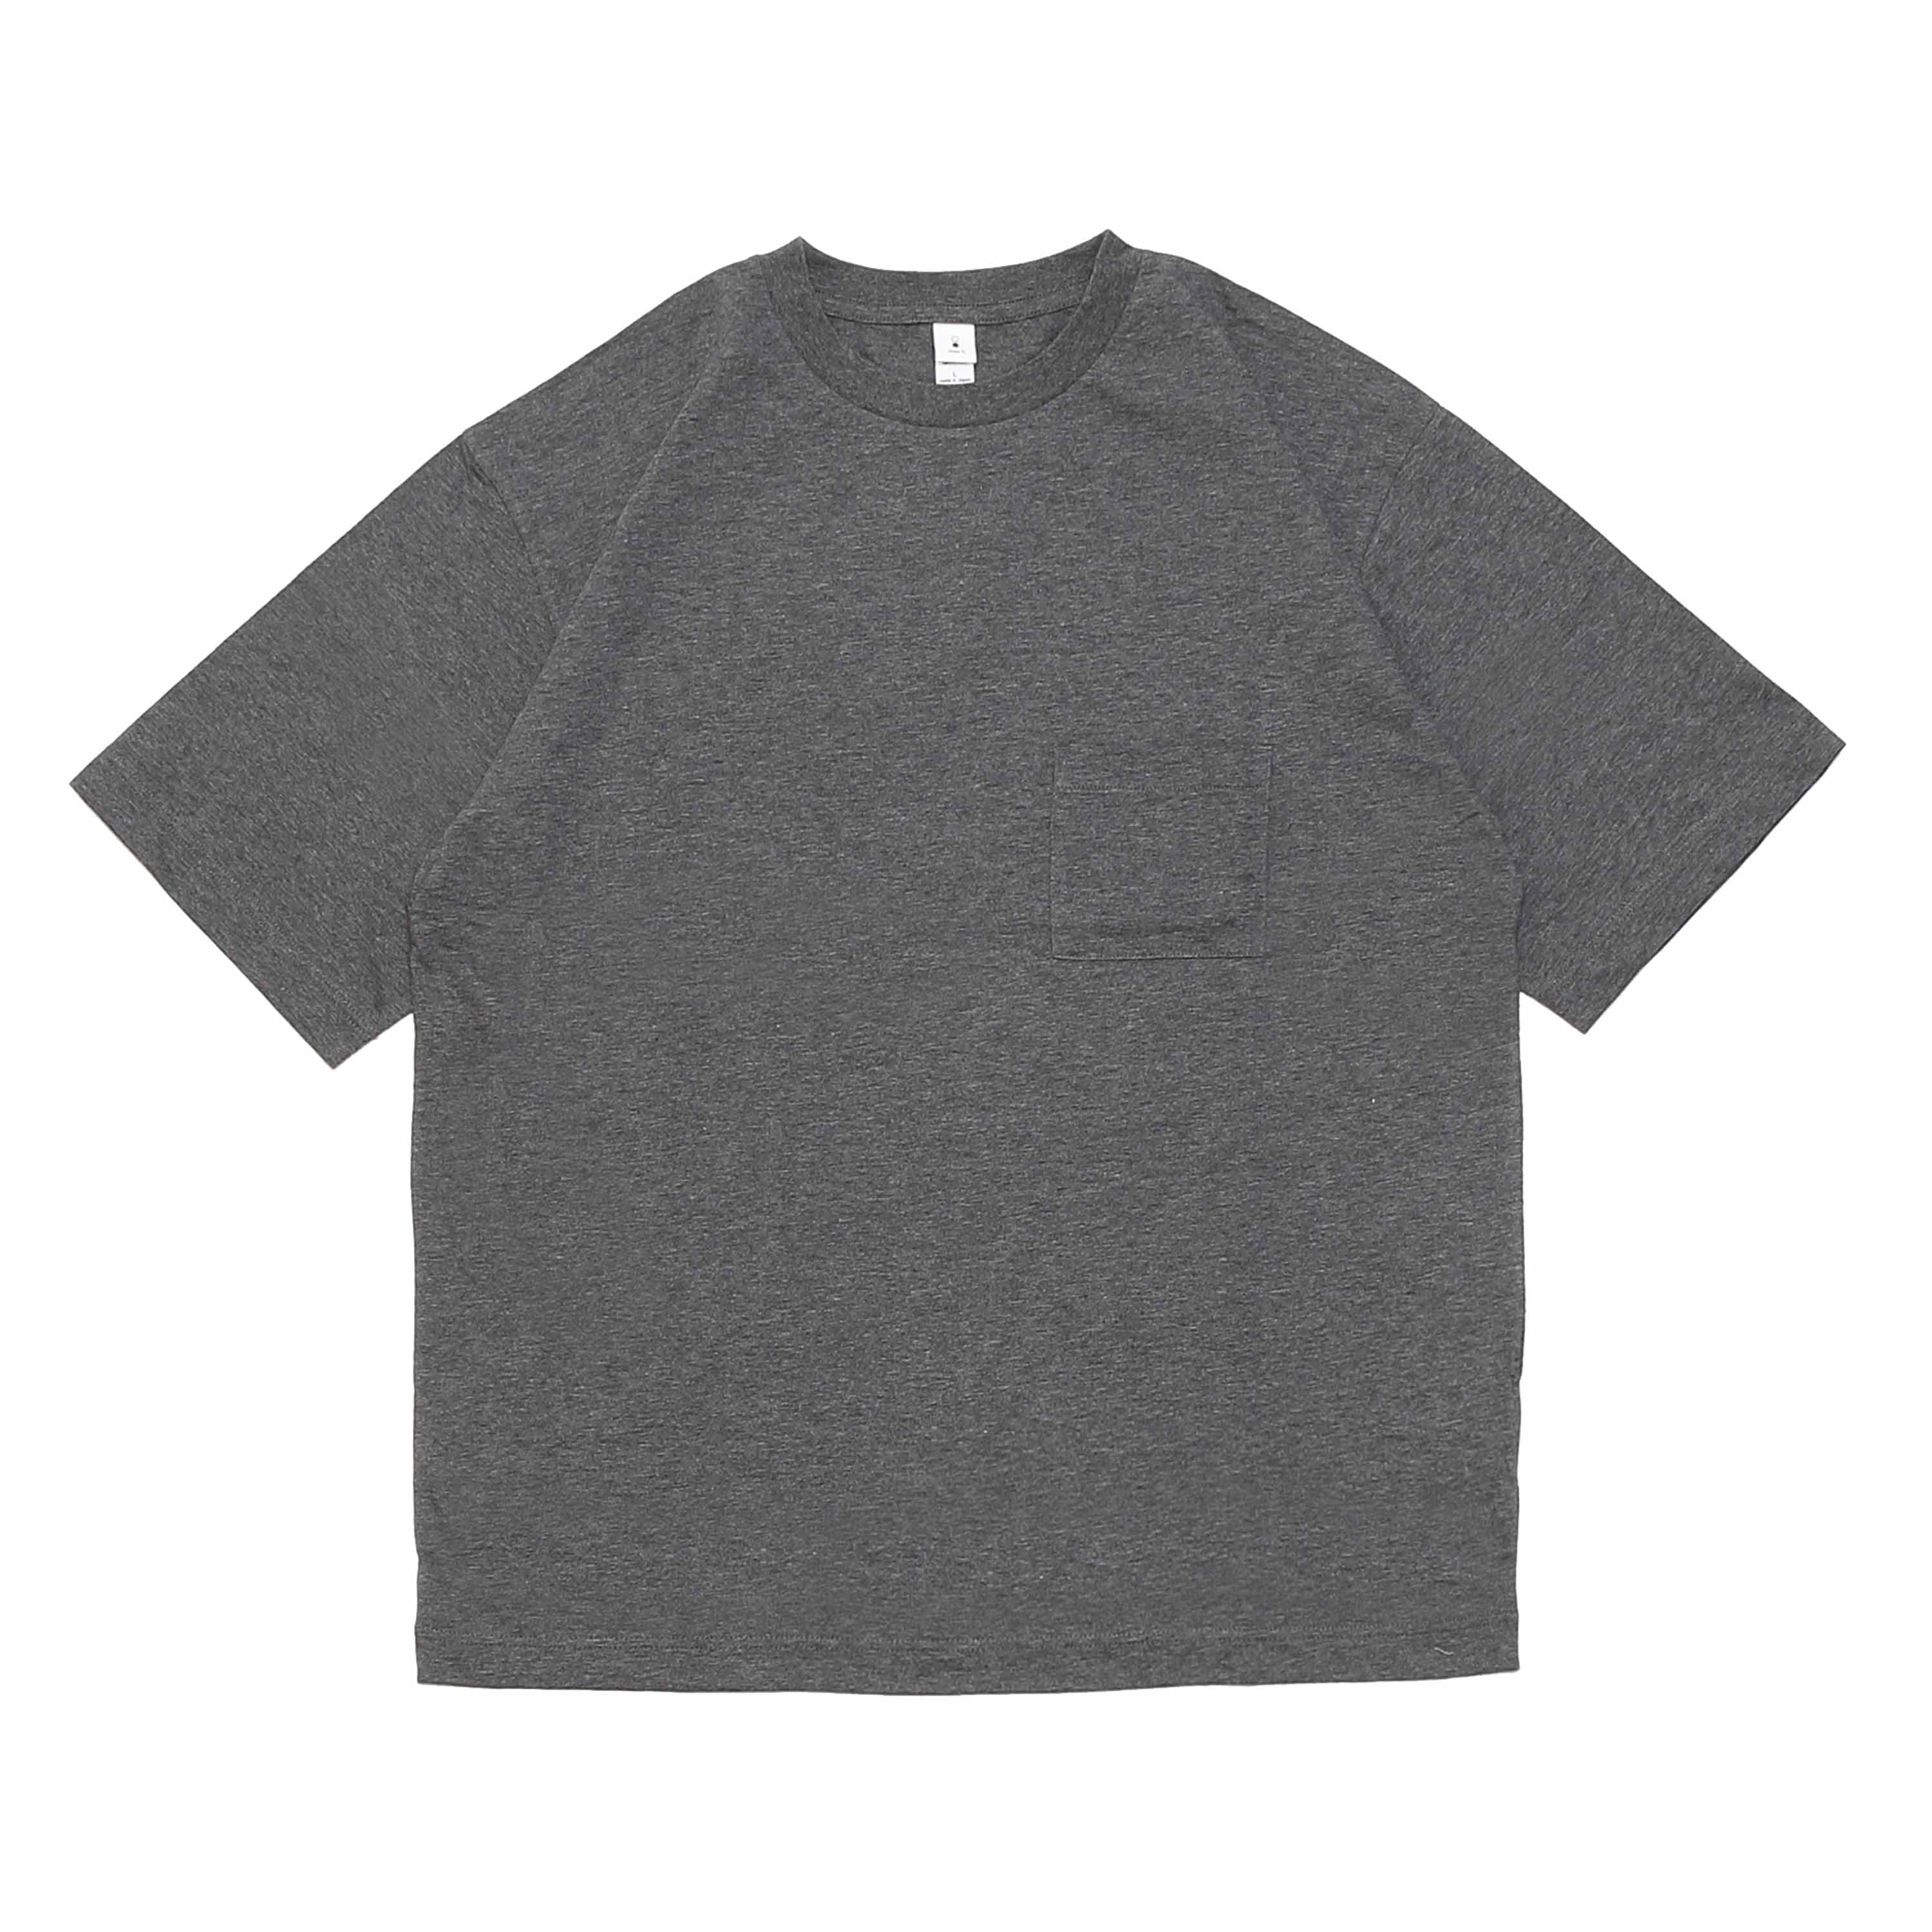 LOOSE FIT S/S TEE - CHARCOAL